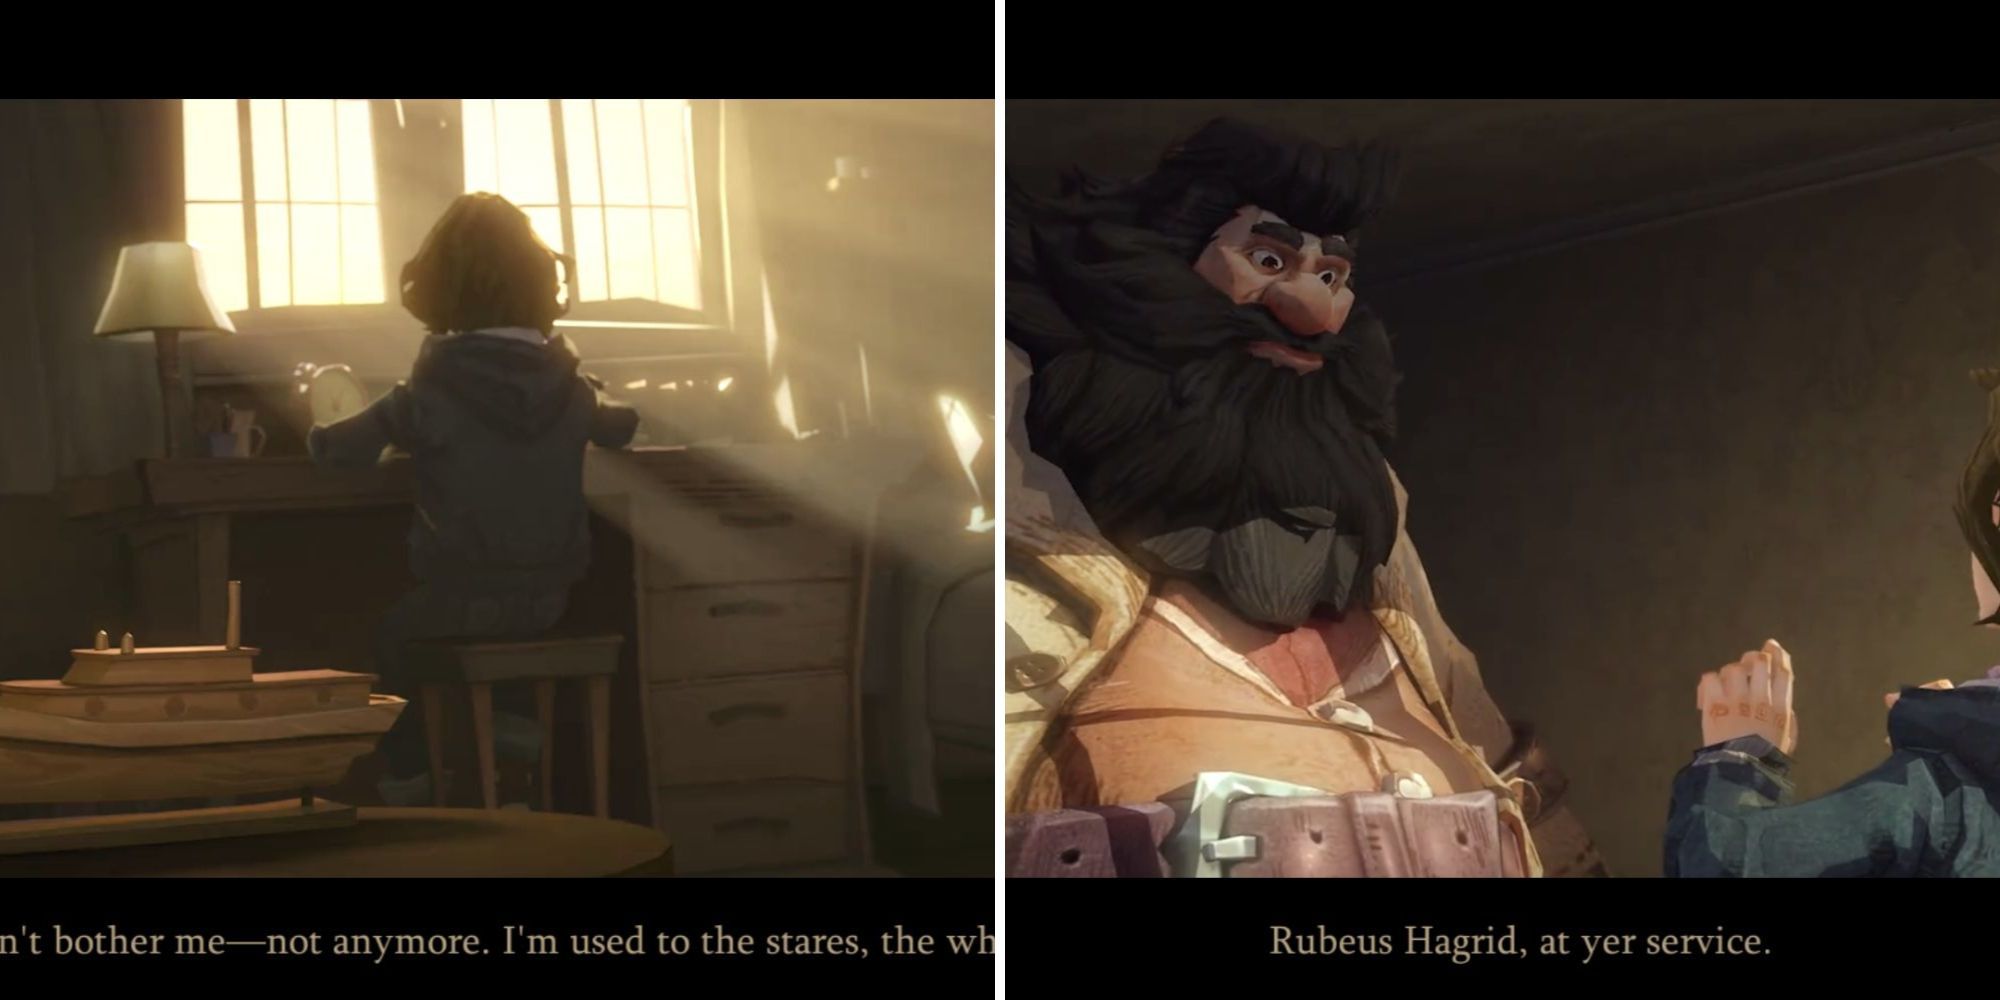 Harry Potter: Magic Awakened Backstory Image featuring player character and Hagrid